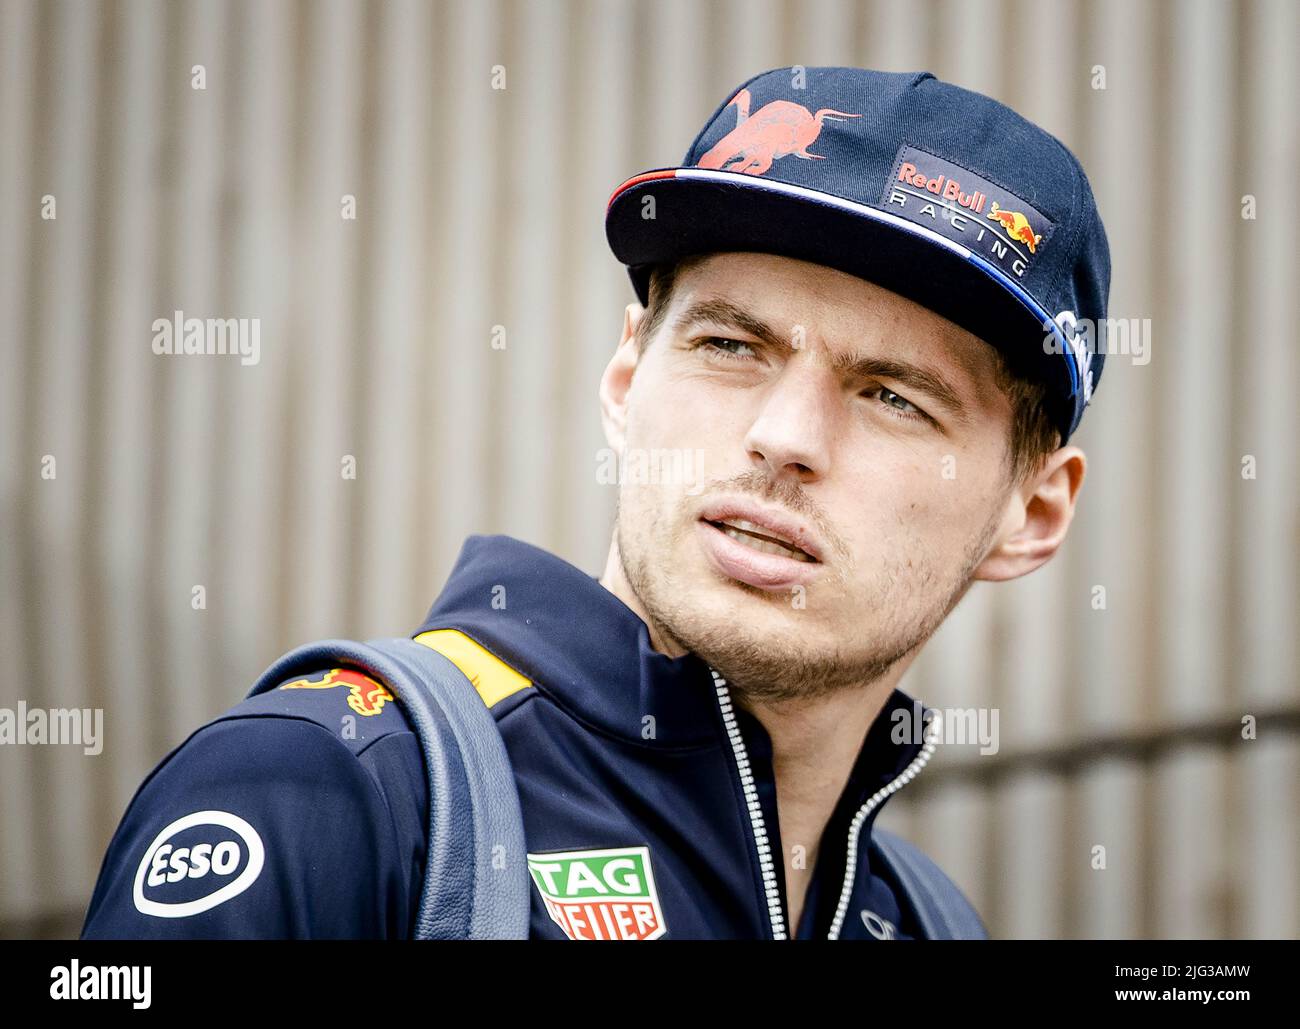 Spielberg, Austria. 7th July, 2022. 2022-07-07 13:32:55 SPIELBERG - Max Verstappen (Red Bull Racing) arrives at the Red Bull Ring race track ahead of the Austrian Grand Prix. ANP SEM VAN DER WAL netherlands out - belgium out Credit: ANP/Alamy Live News Credit: ANP/Alamy Live News Stock Photo